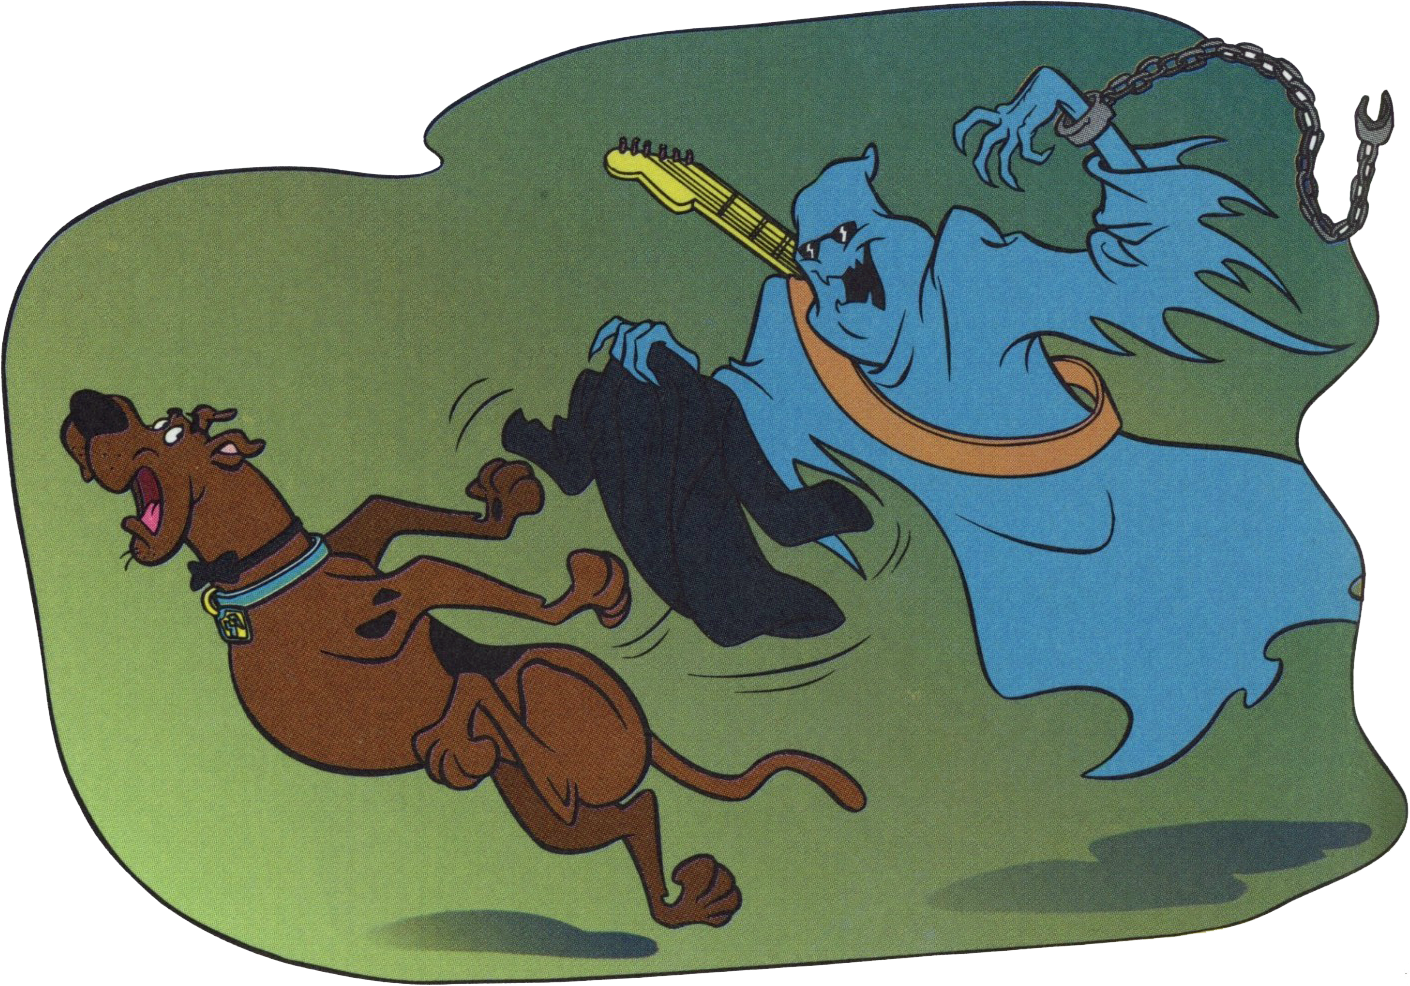  Scoob and the Groovy Ghost reenact a scene from the Bible where they play Joseph and Potiphar's wife, respectively. 